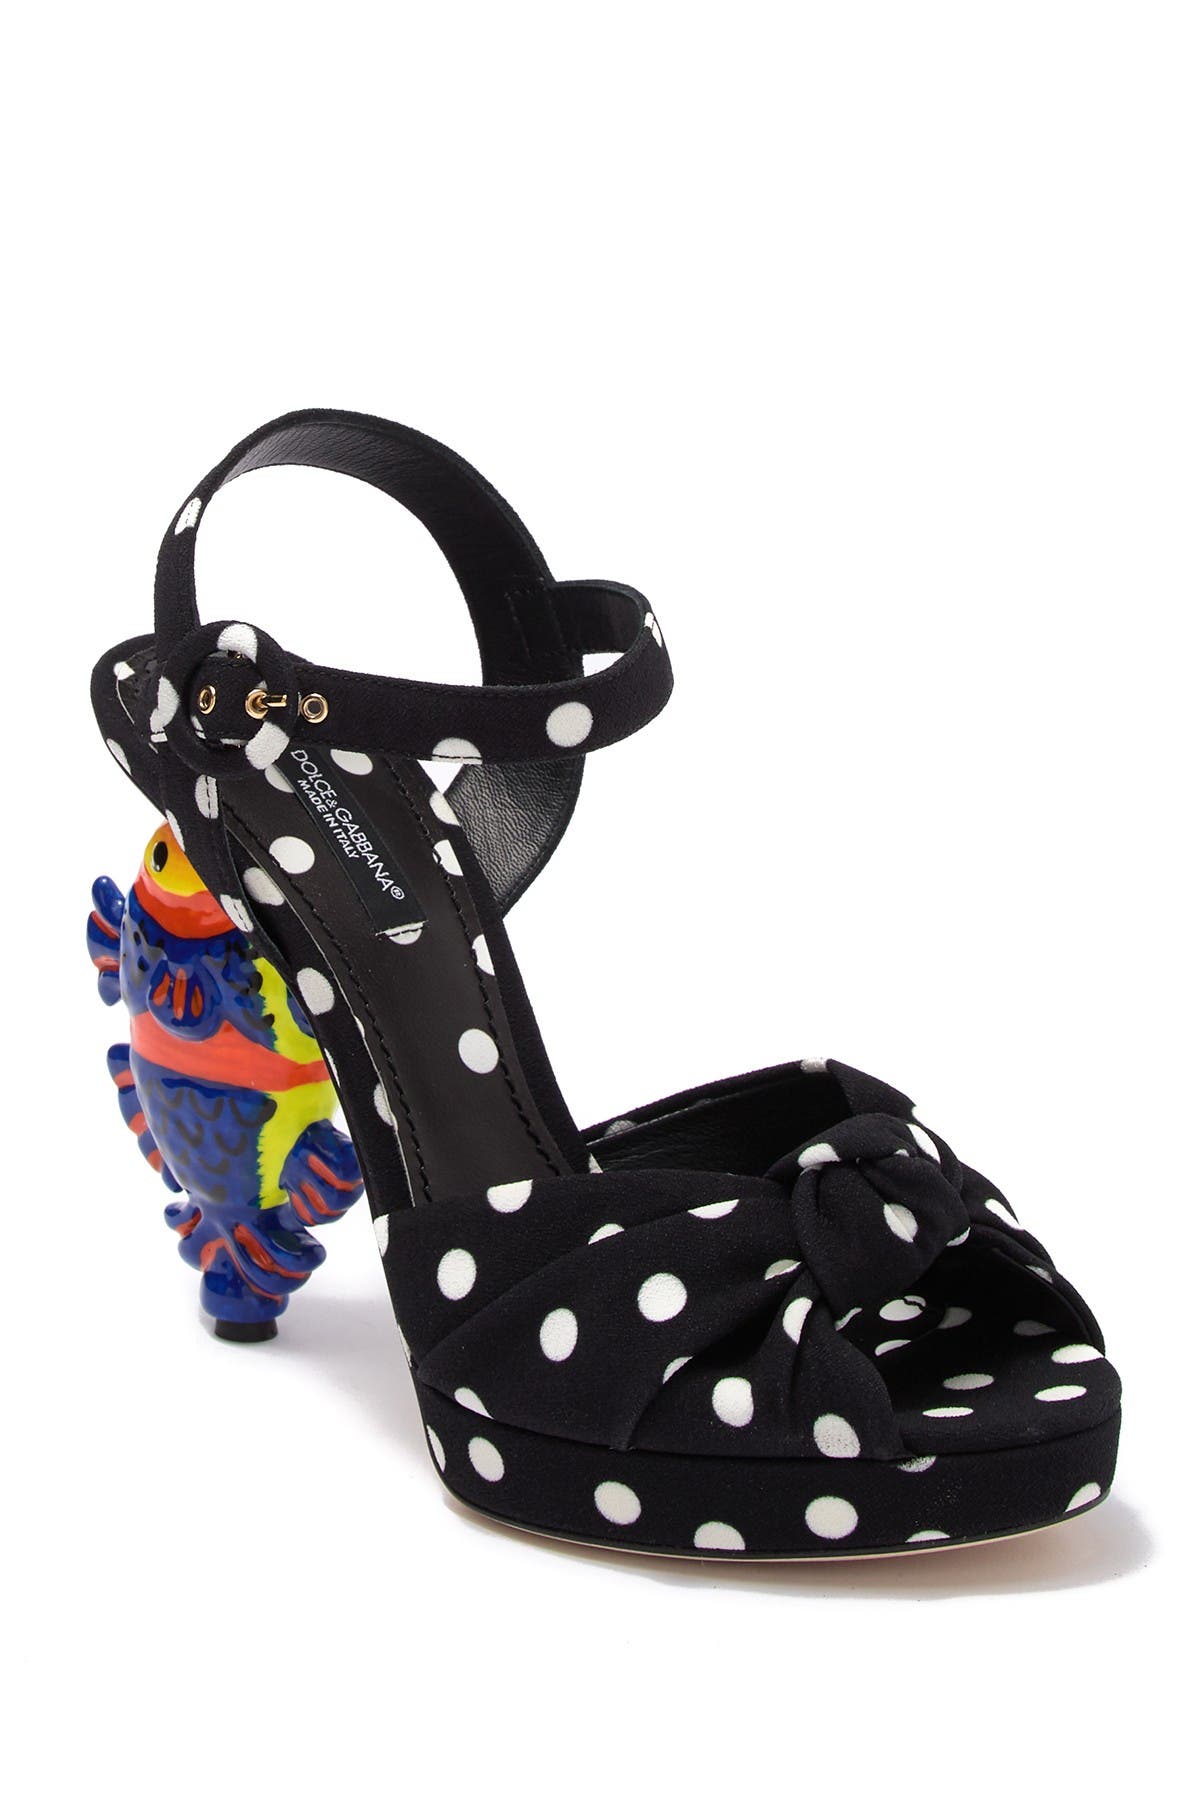 dolce and gabbana disney shoes